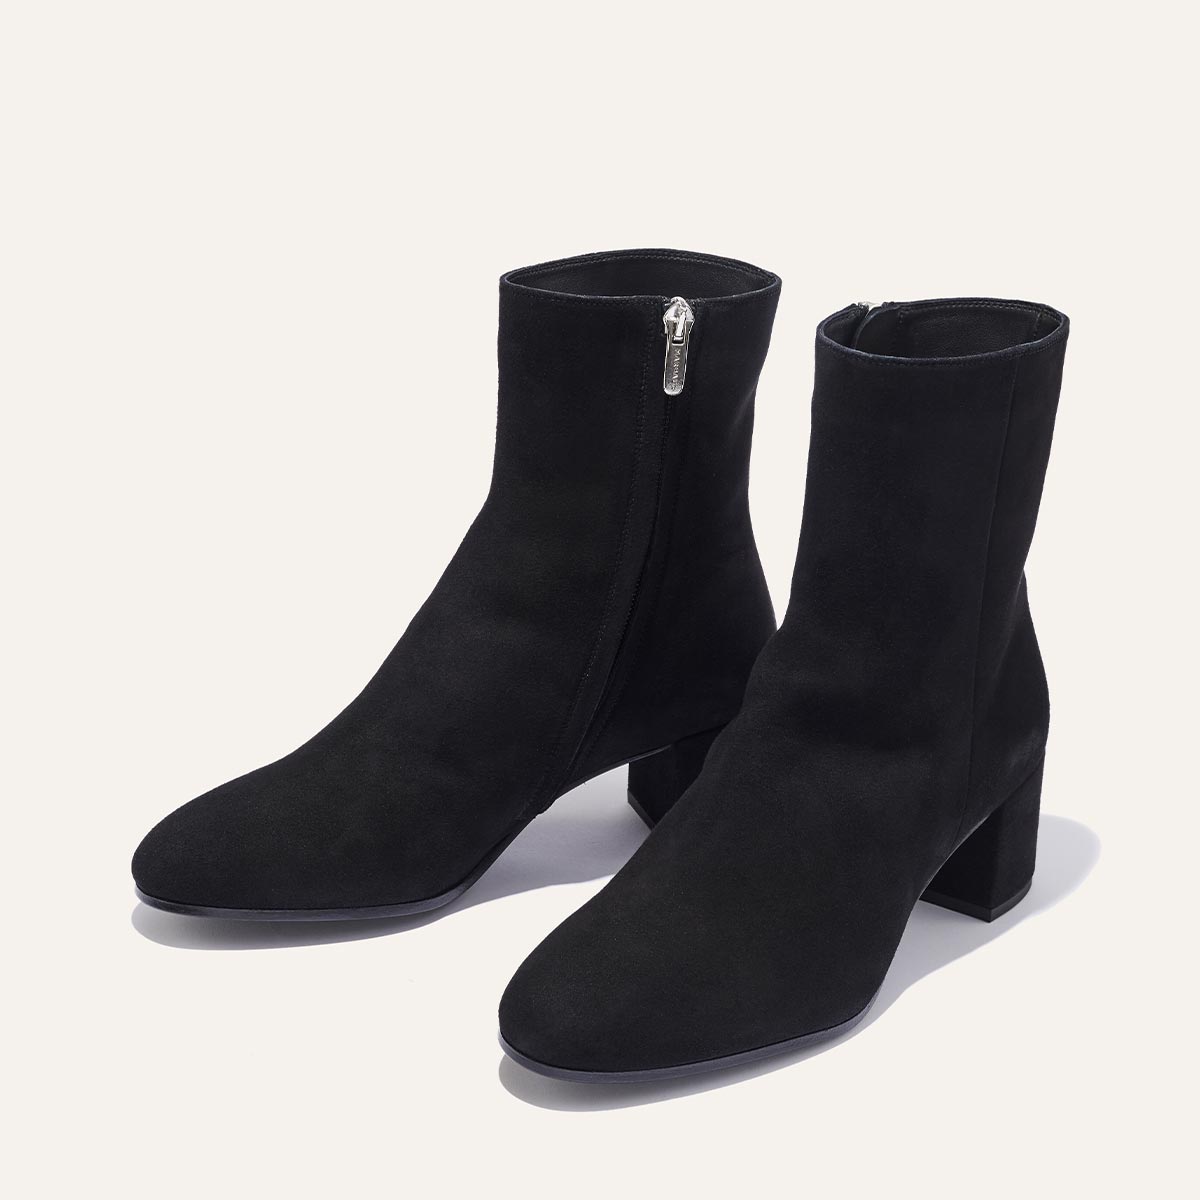 The Boot - Black Suede